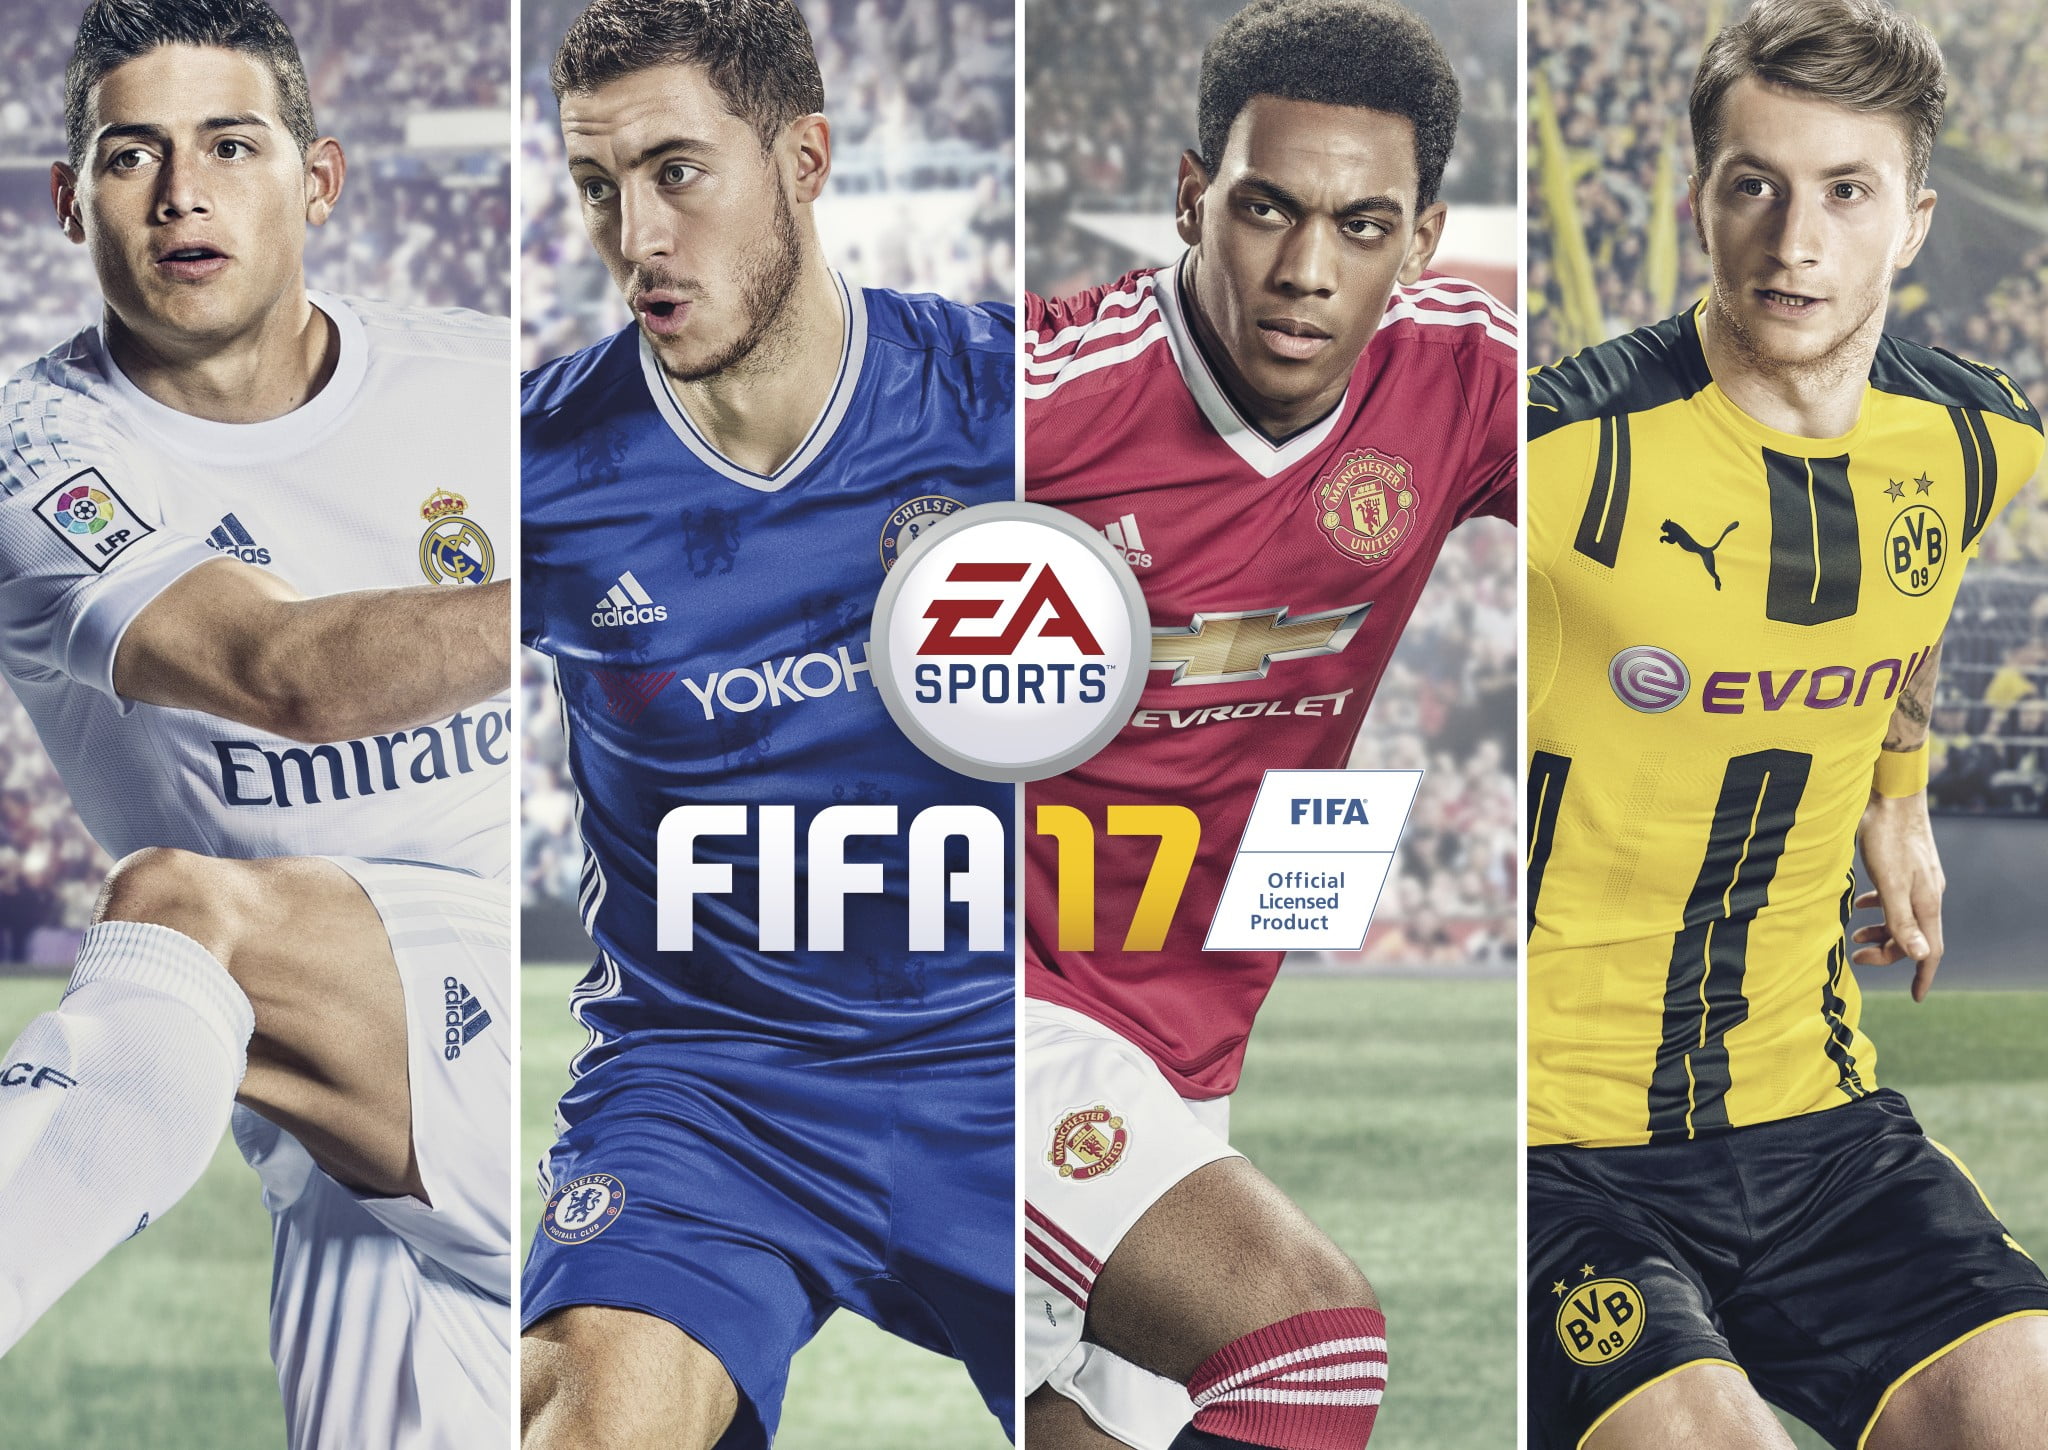 Fifa 17 game wallpaper, video games, sport, group of people, competition